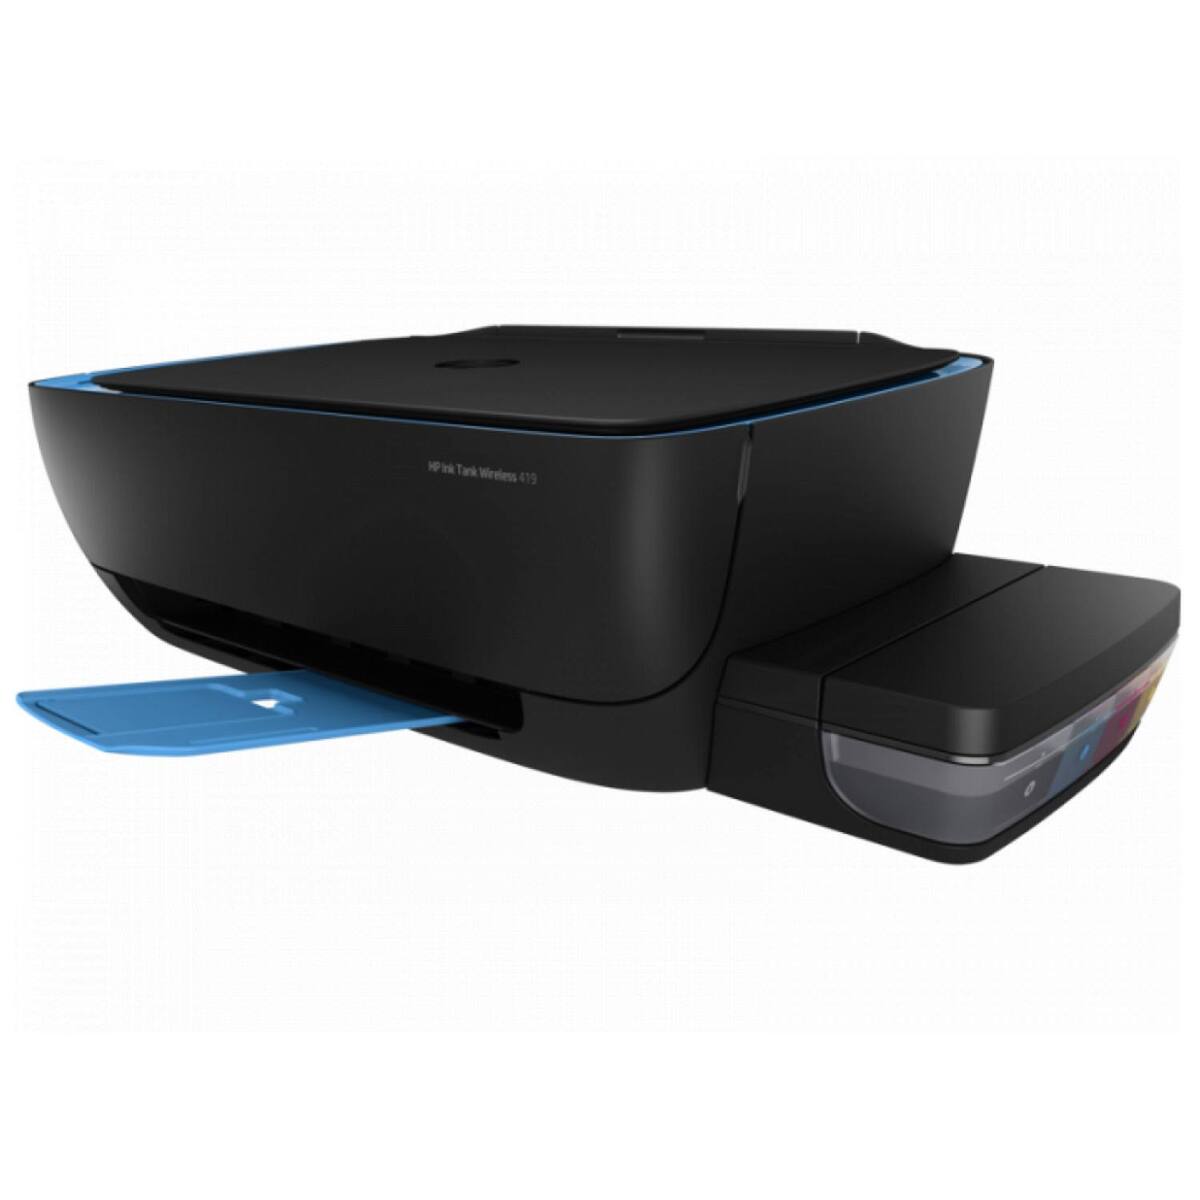 HP Ink Tank All In One Wireless Printer 419